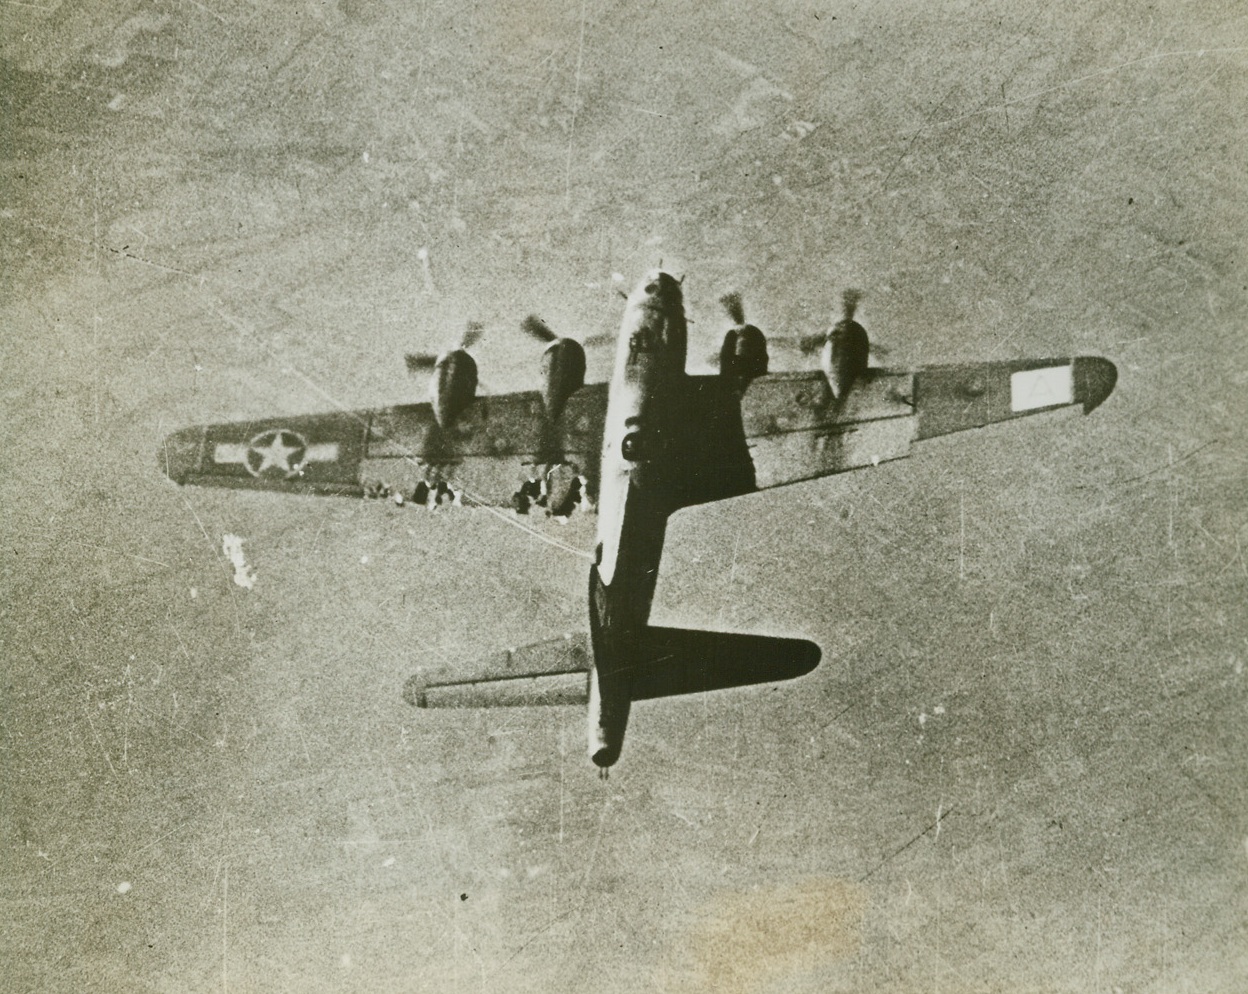 Heading for Gelsenkirchen, 12/31/1943. SOMEWHERE OVER GERMANY—Despite a badly shot up left wing, this flying fortress maintained its place in the formation on the way to bomb Gelsenkirchen, Germany, a vital communications center. This was one of several raids on Gelsenkirchen, which lies 27 miles west of Portmund, on the Duisburg-Hamm Railway.  Credit:  U.S. ARMY AIR FORCES PHOTO from ACME.;